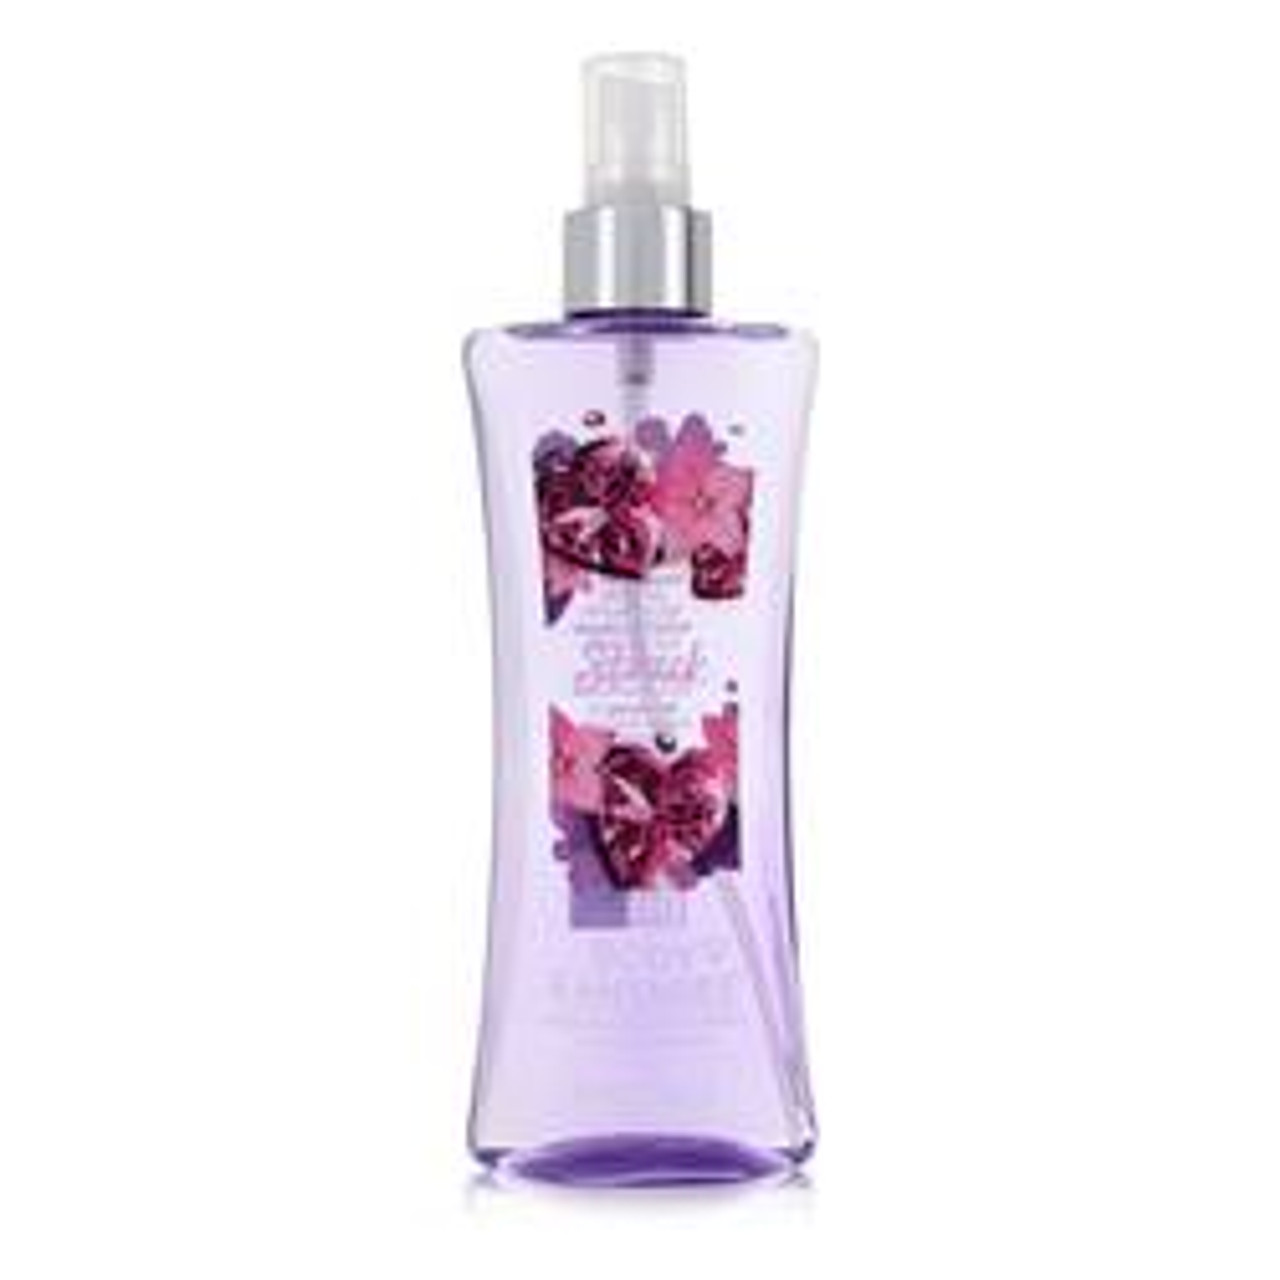 Body Fantasies Love Struck Perfume By Parfums De Coeur Body Spray 8 oz for Women - [From 23.00 - Choose pk Qty ] - *Ships from Miami